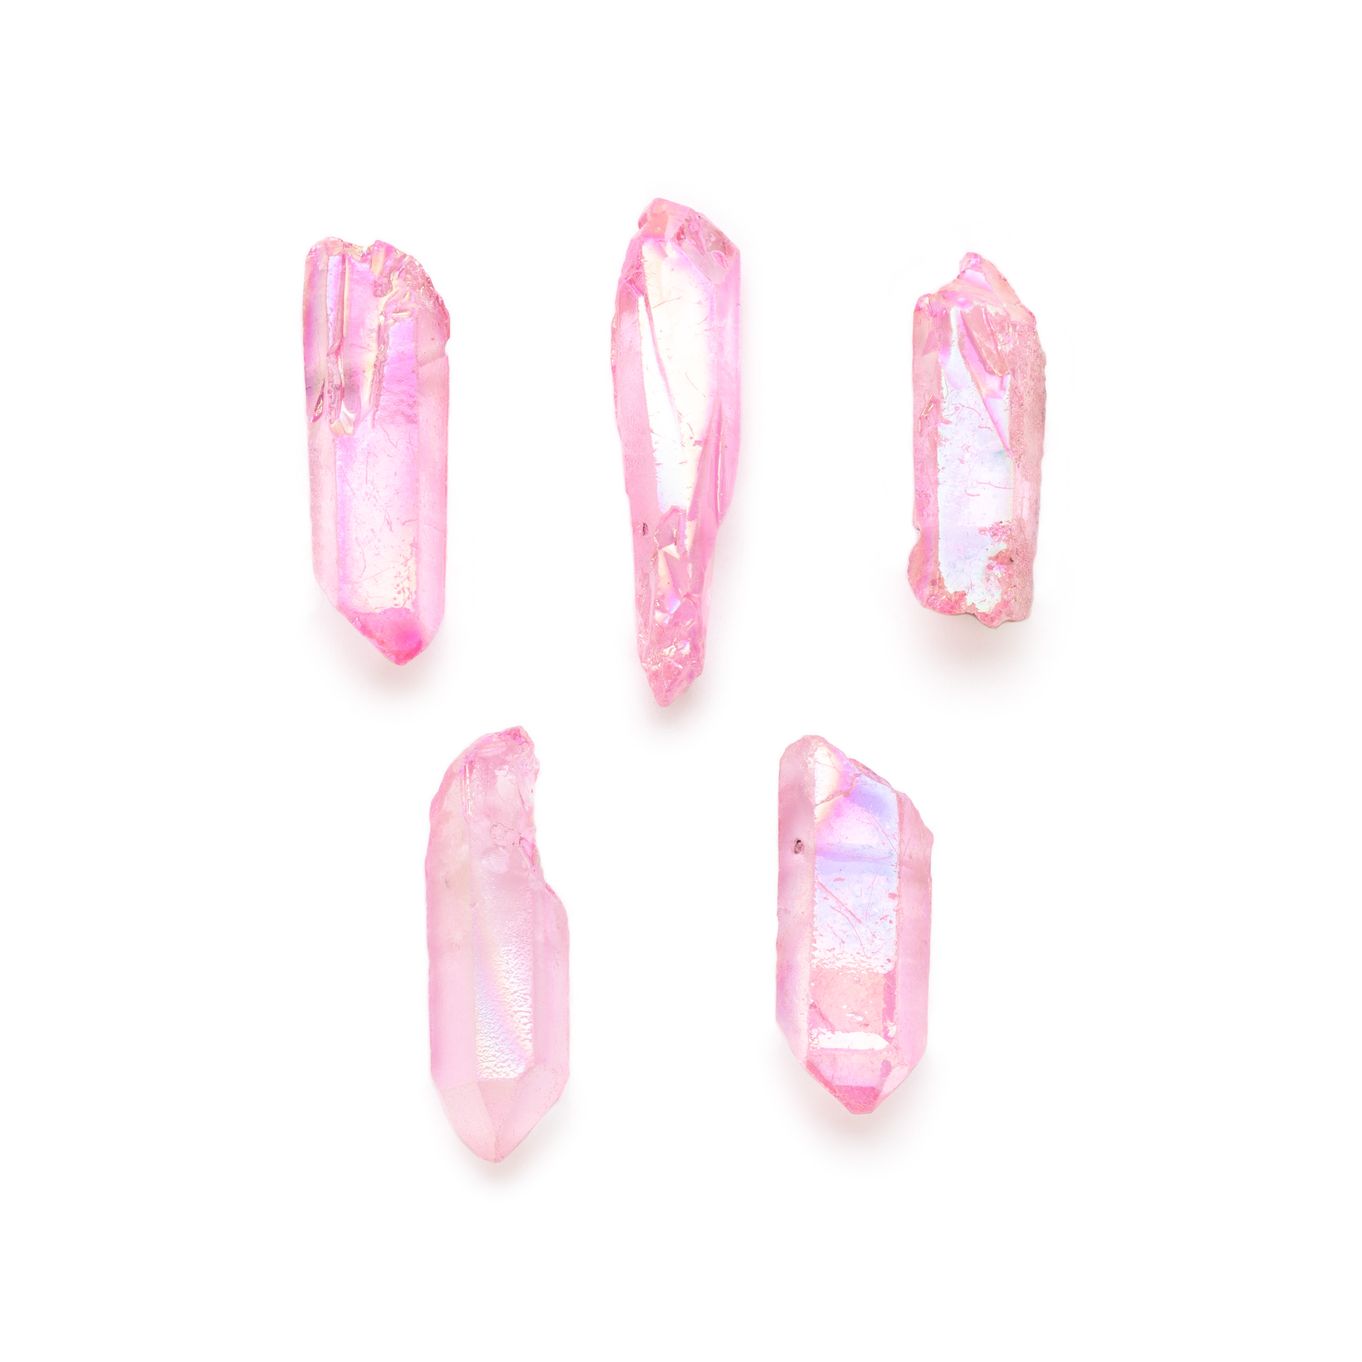 Mystic Pink Quartz Points - Approx From 15mm, Pack of 10 Points